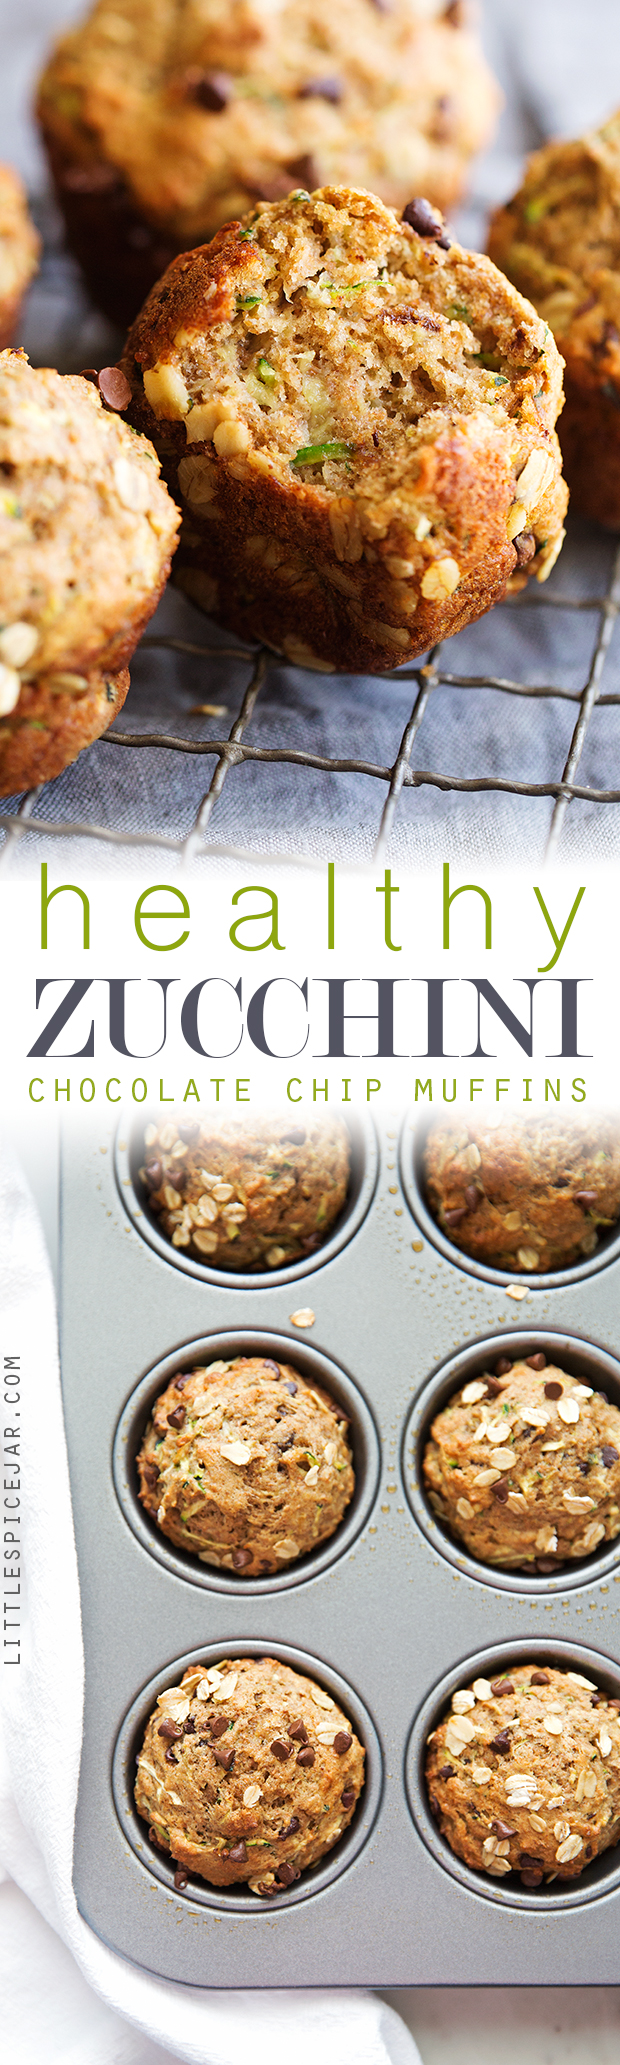 Healthy Zucchini Muffins with Chocolate Chips - These muffins are 175 calories each and loaded with zucchini and chocolate chips. So yummy! #zucchinimuffins #chocolatechipmuffins #healthymuffins #mealprep | Littlespicejar.com